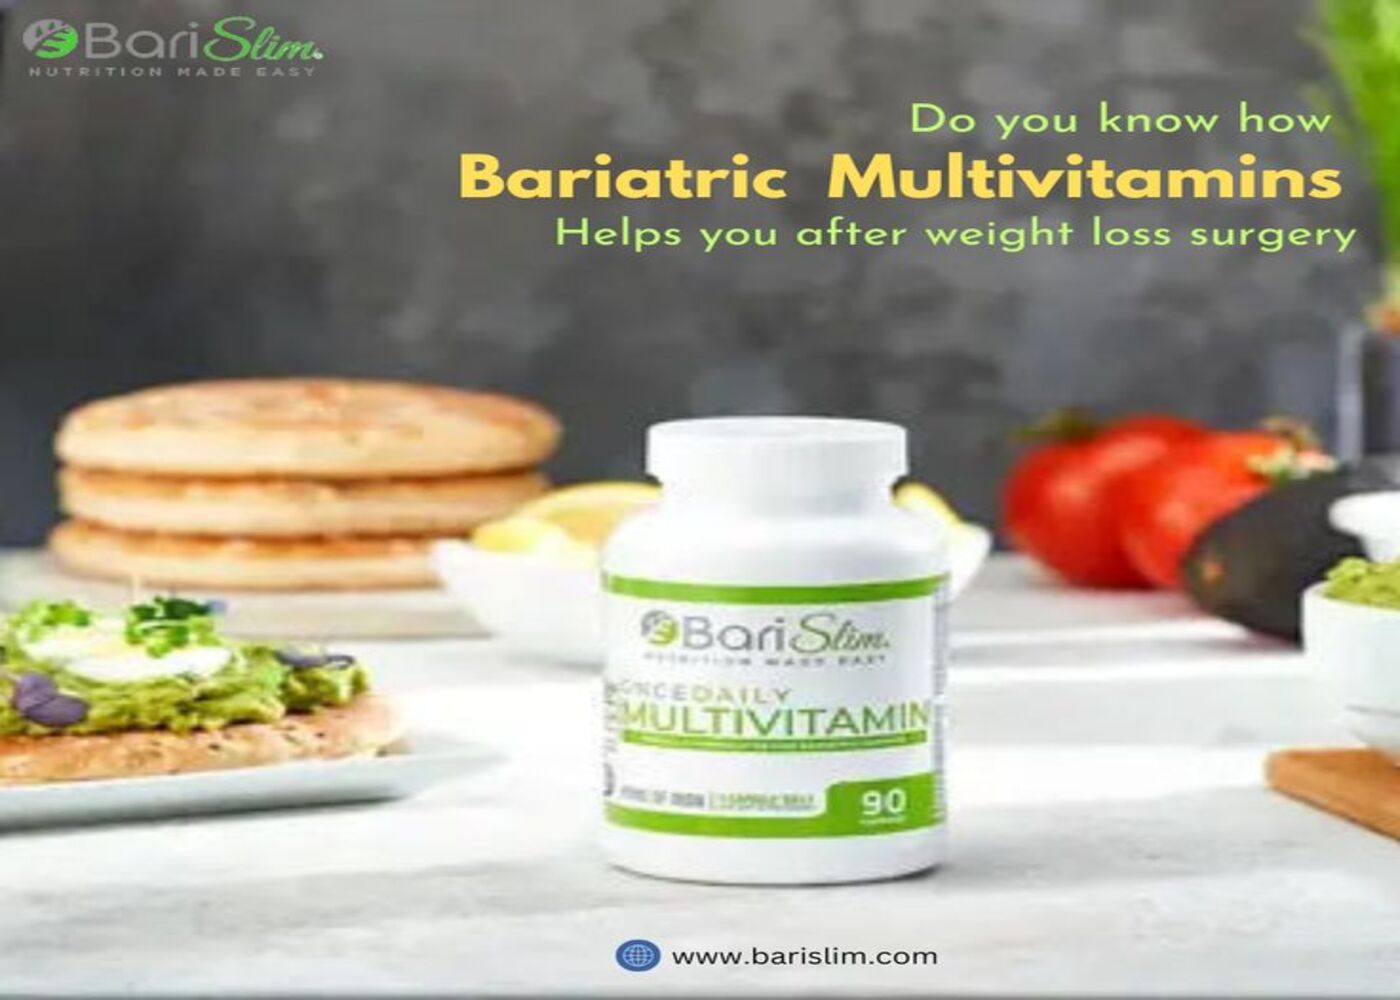 Complete Guide to The Importance of Bariatric Multivitamins For Gastric Bypass | Barislim